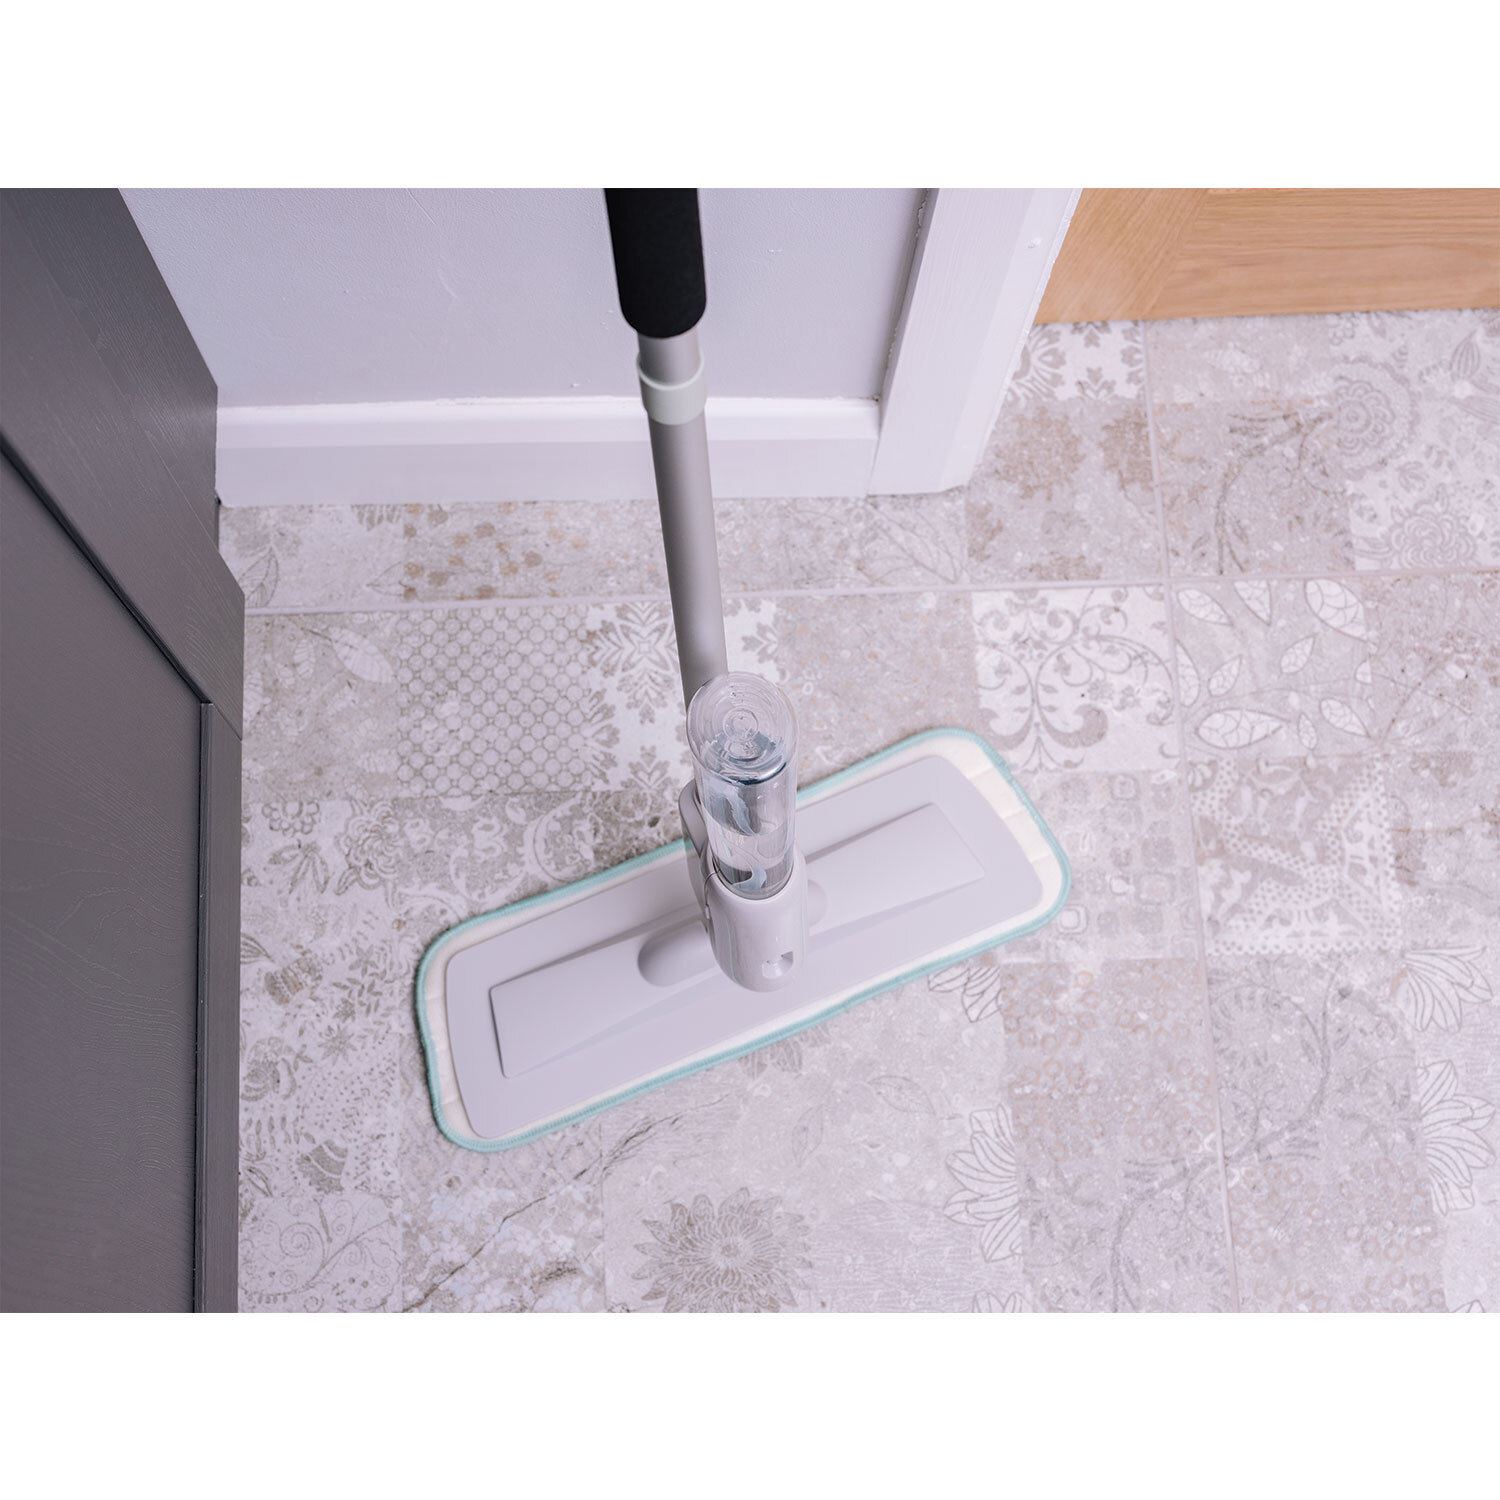 Addis 2 in 1 Spray Mop Image 3